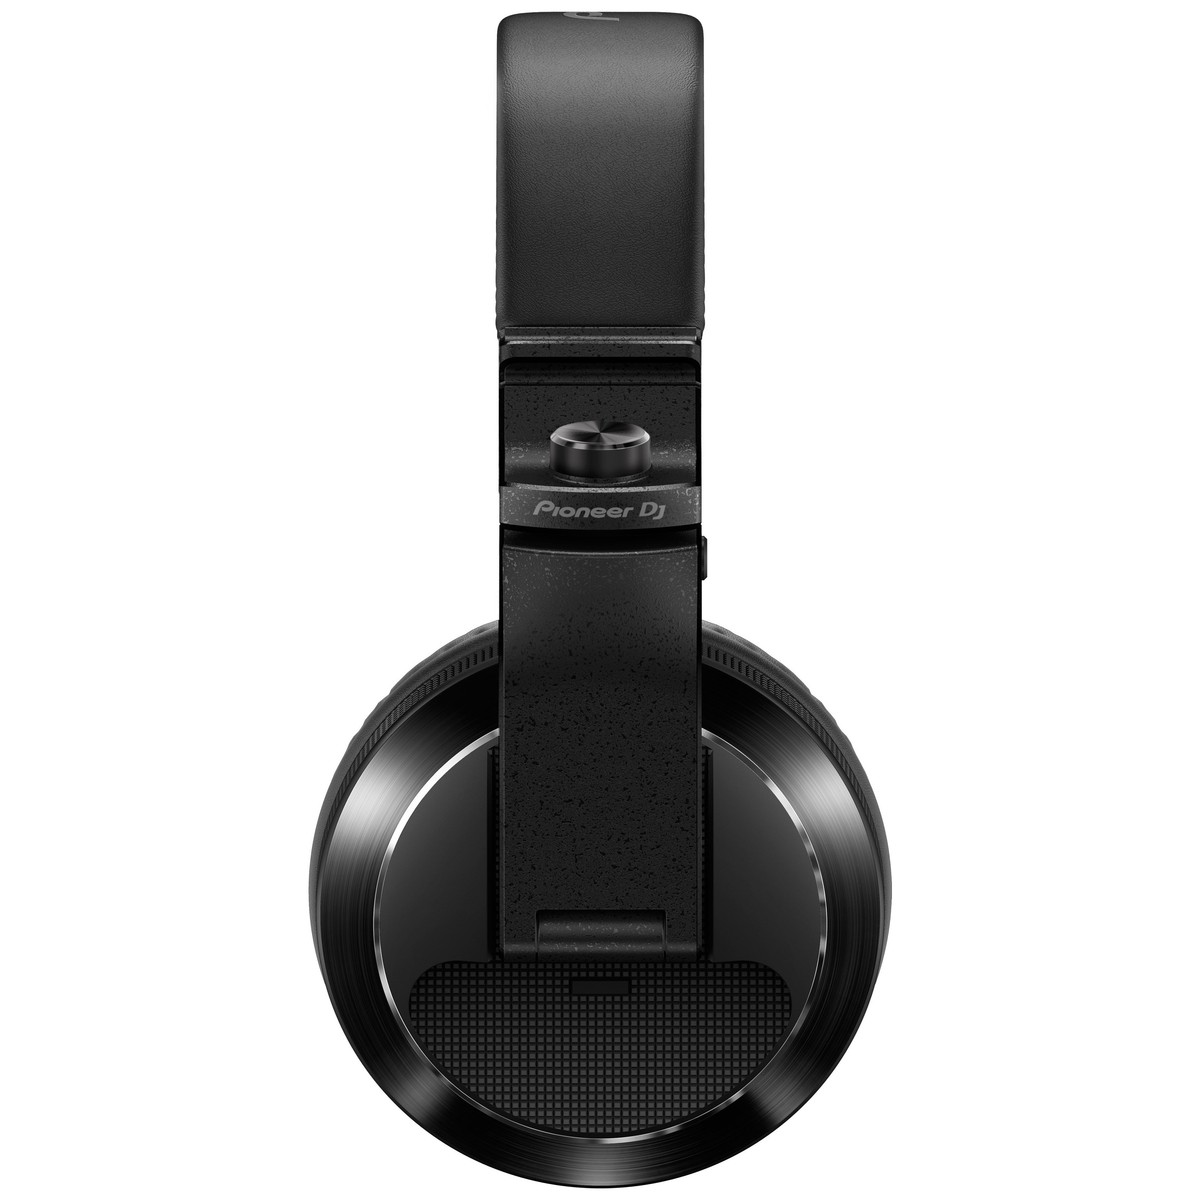 Main View Pioneer DJ HDJ-X7, black headphones from the side on a white background.